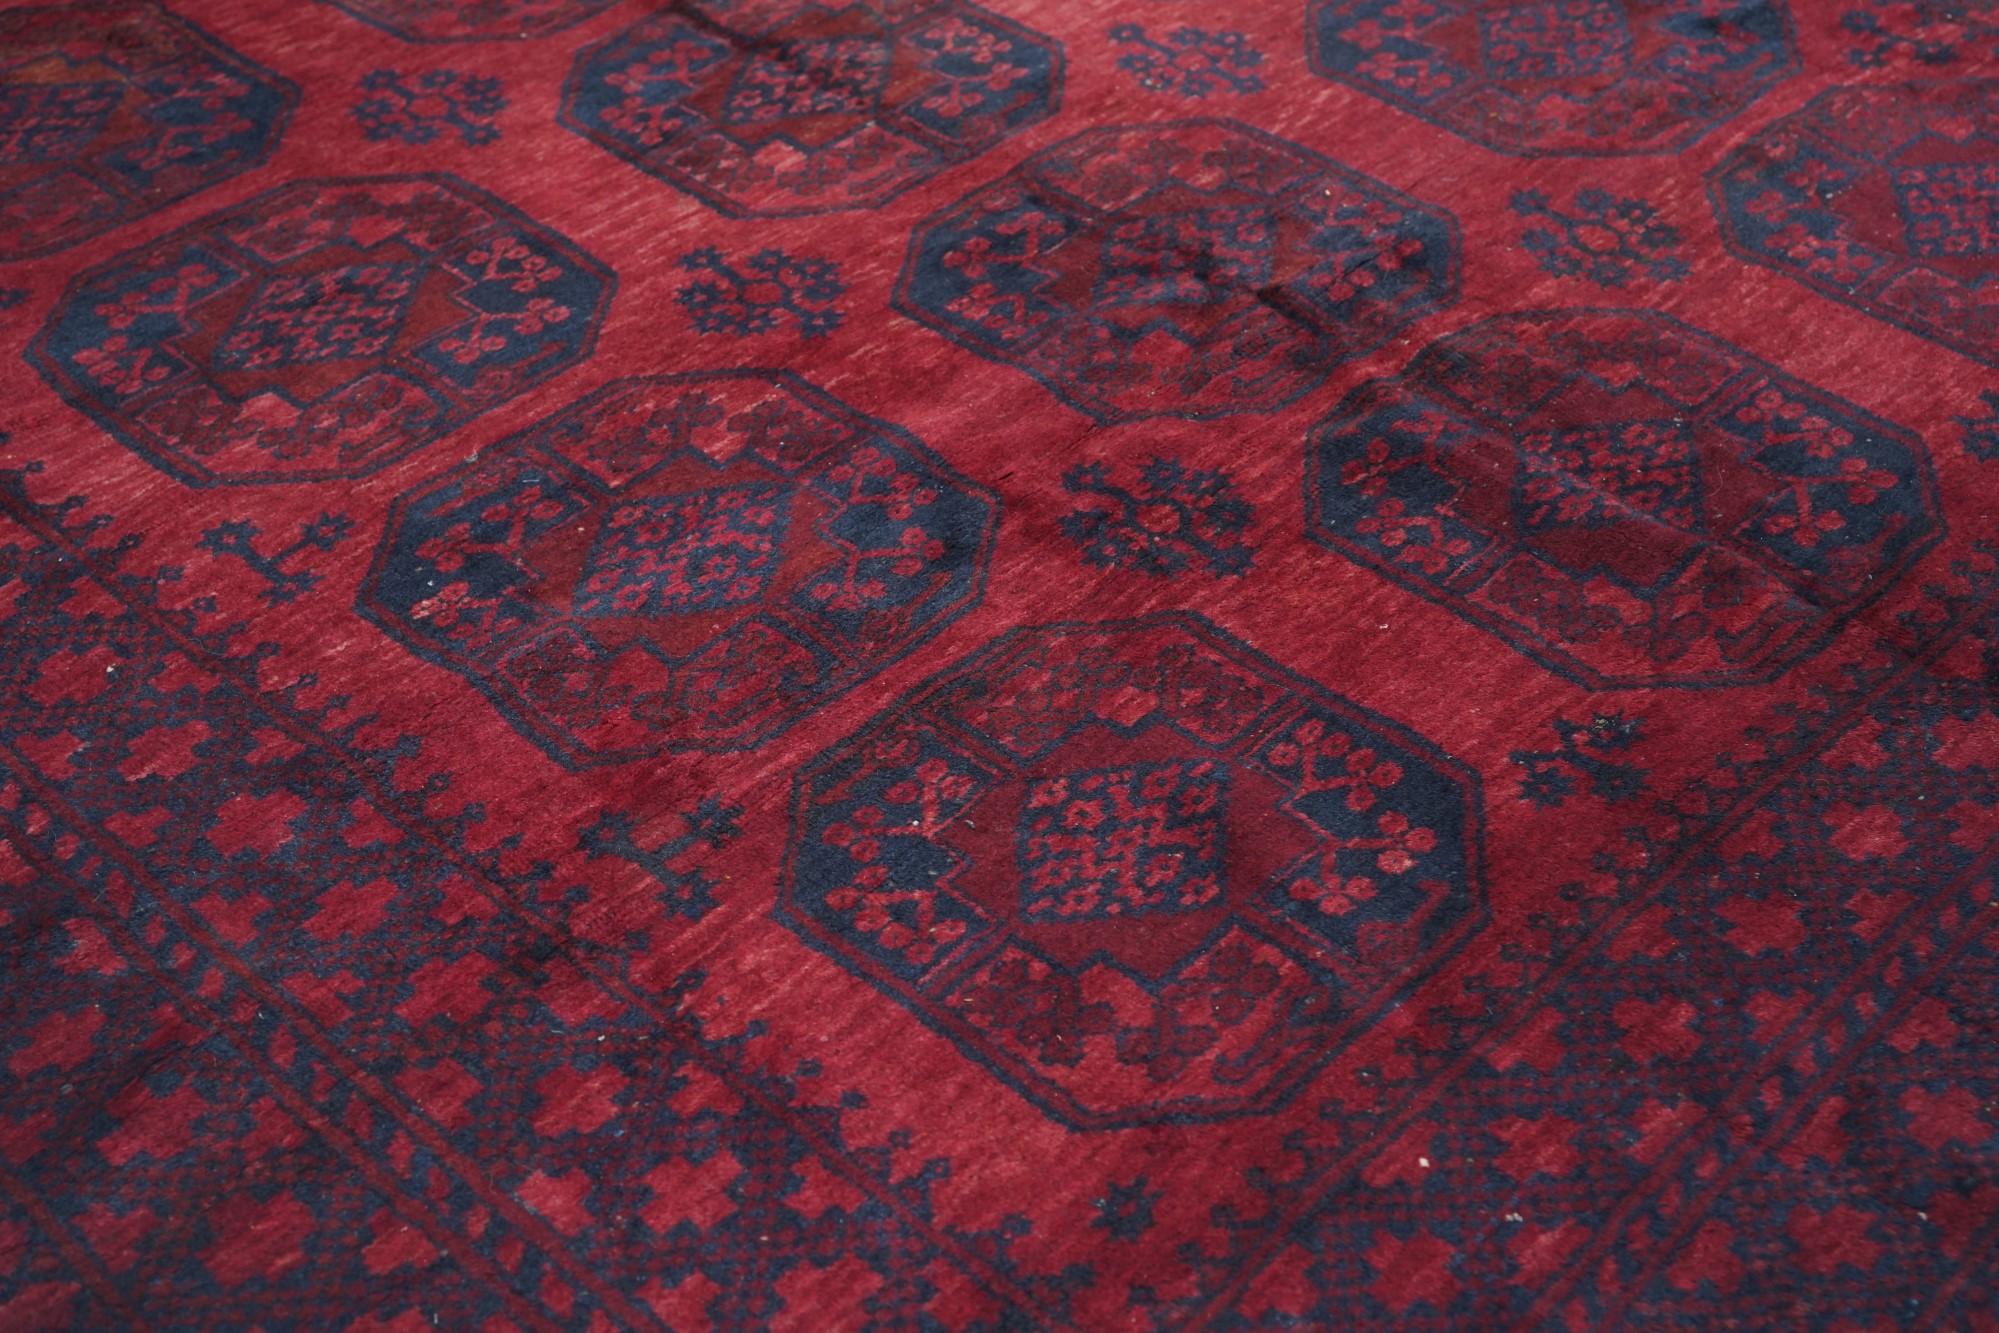 Vintage Bokhara Rug 6'11'' x 8'11'' In Good Condition For Sale In New York, NY